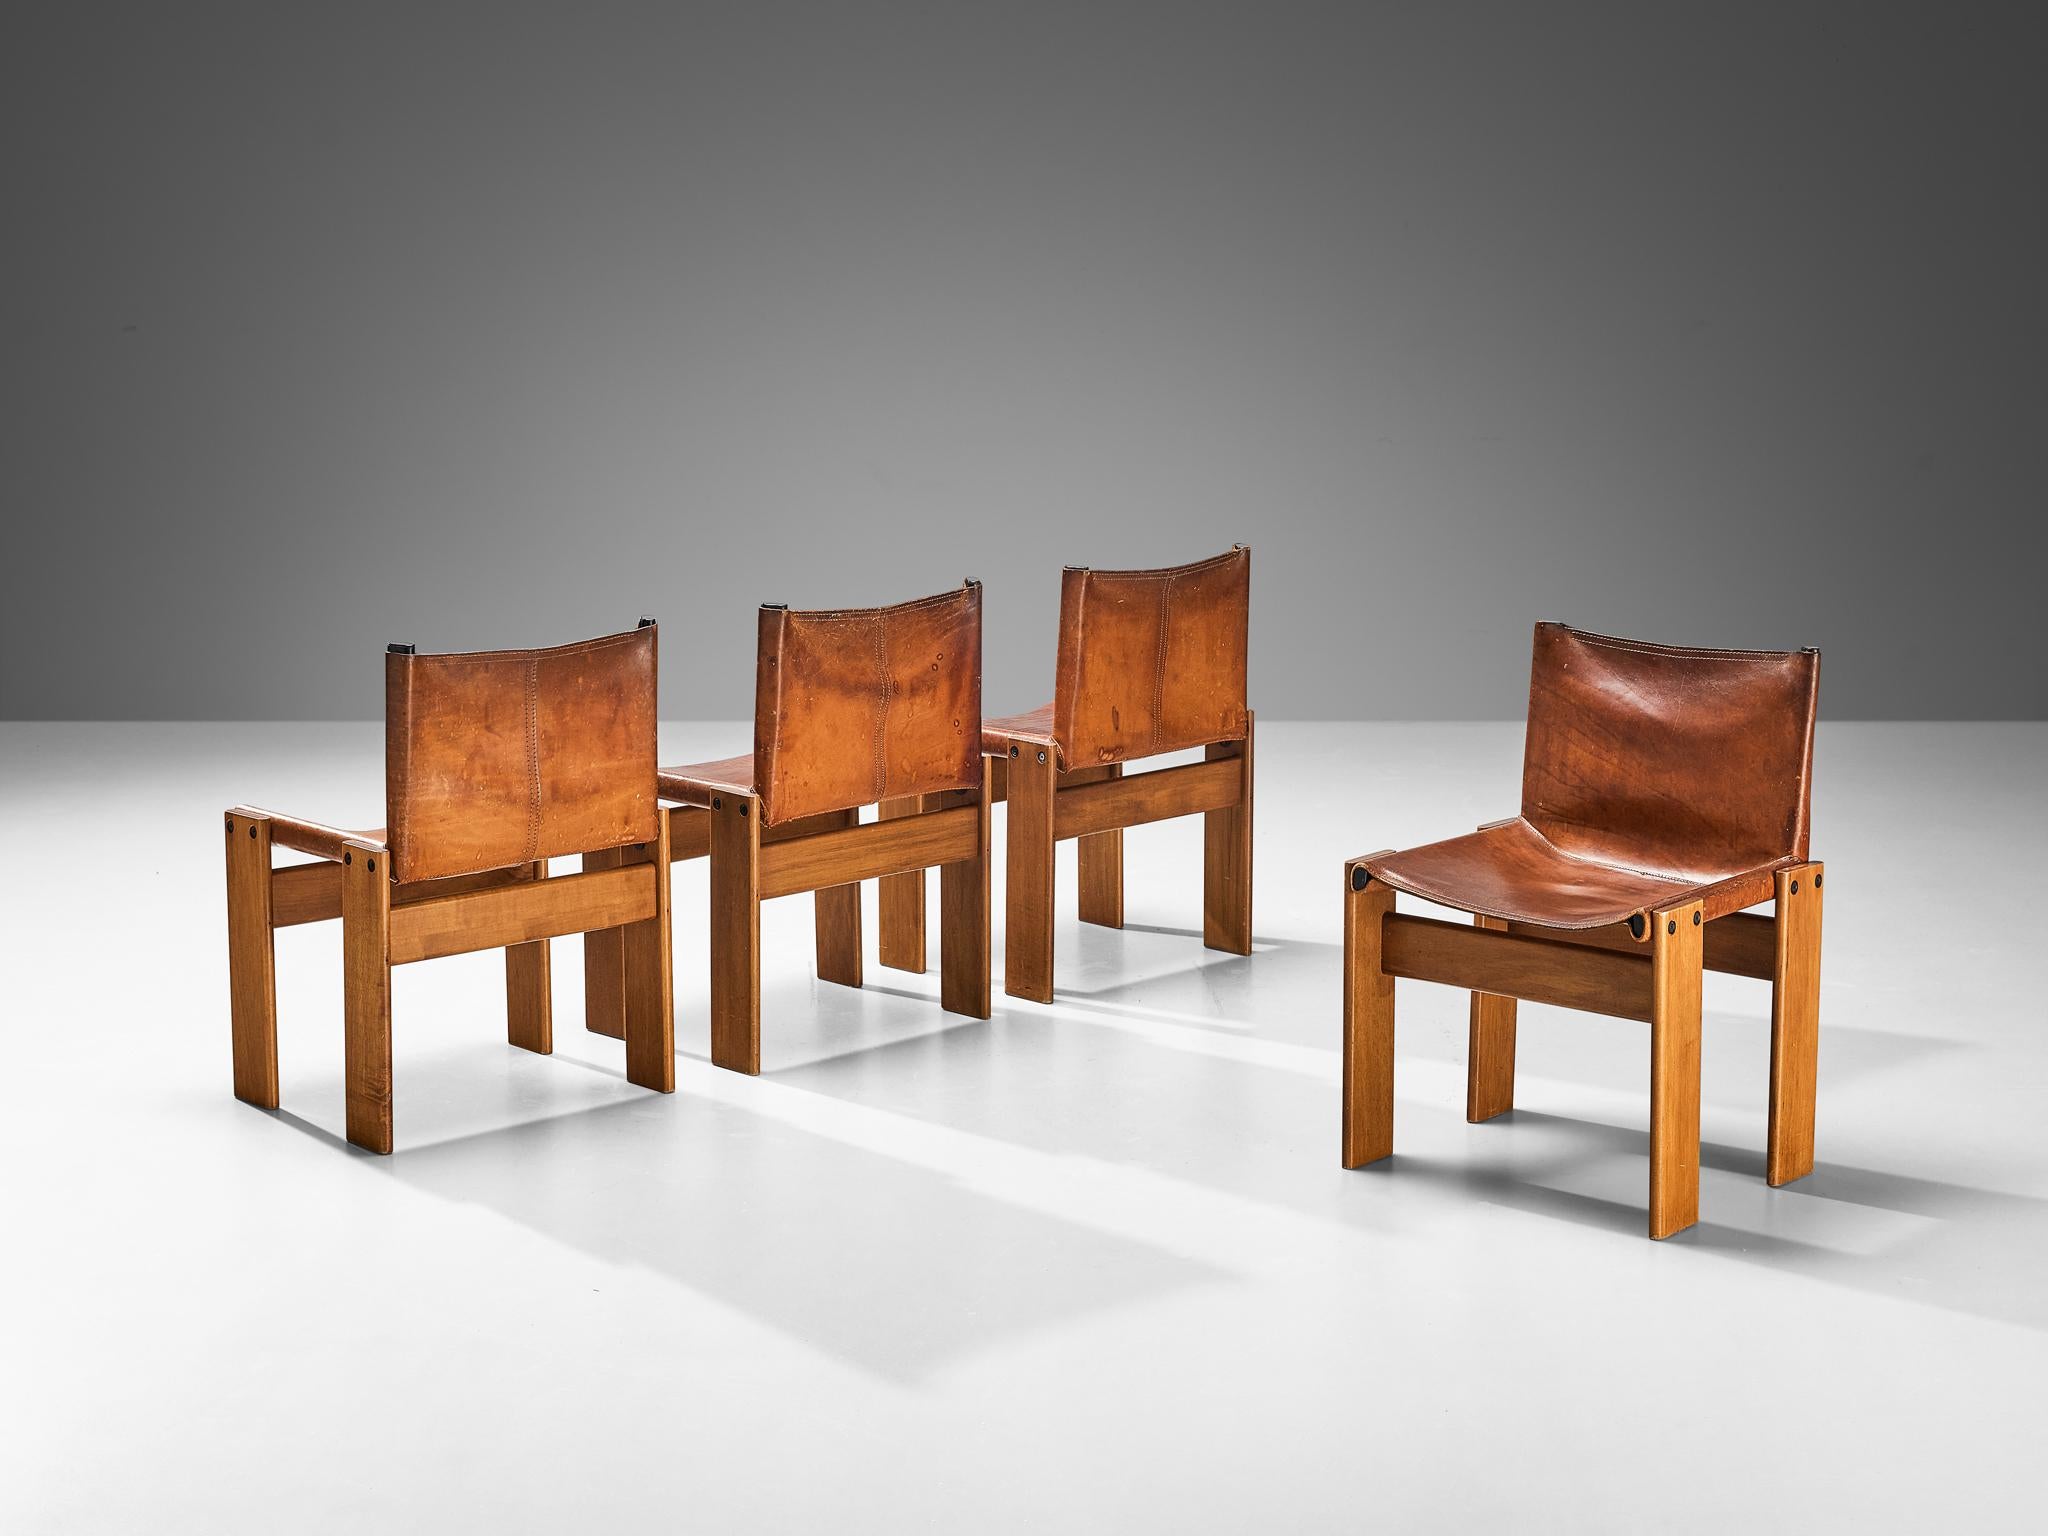 Afra & Tobia Scarpa for Molteni, set of four 'Monk' dining chairs, ash, cognac leather, Italy, design 1974

Set of four 'Monk' chairs by Italian designers Afra & Tobia Scarpa. The cognac leather forms a striking combination with the ash wood.